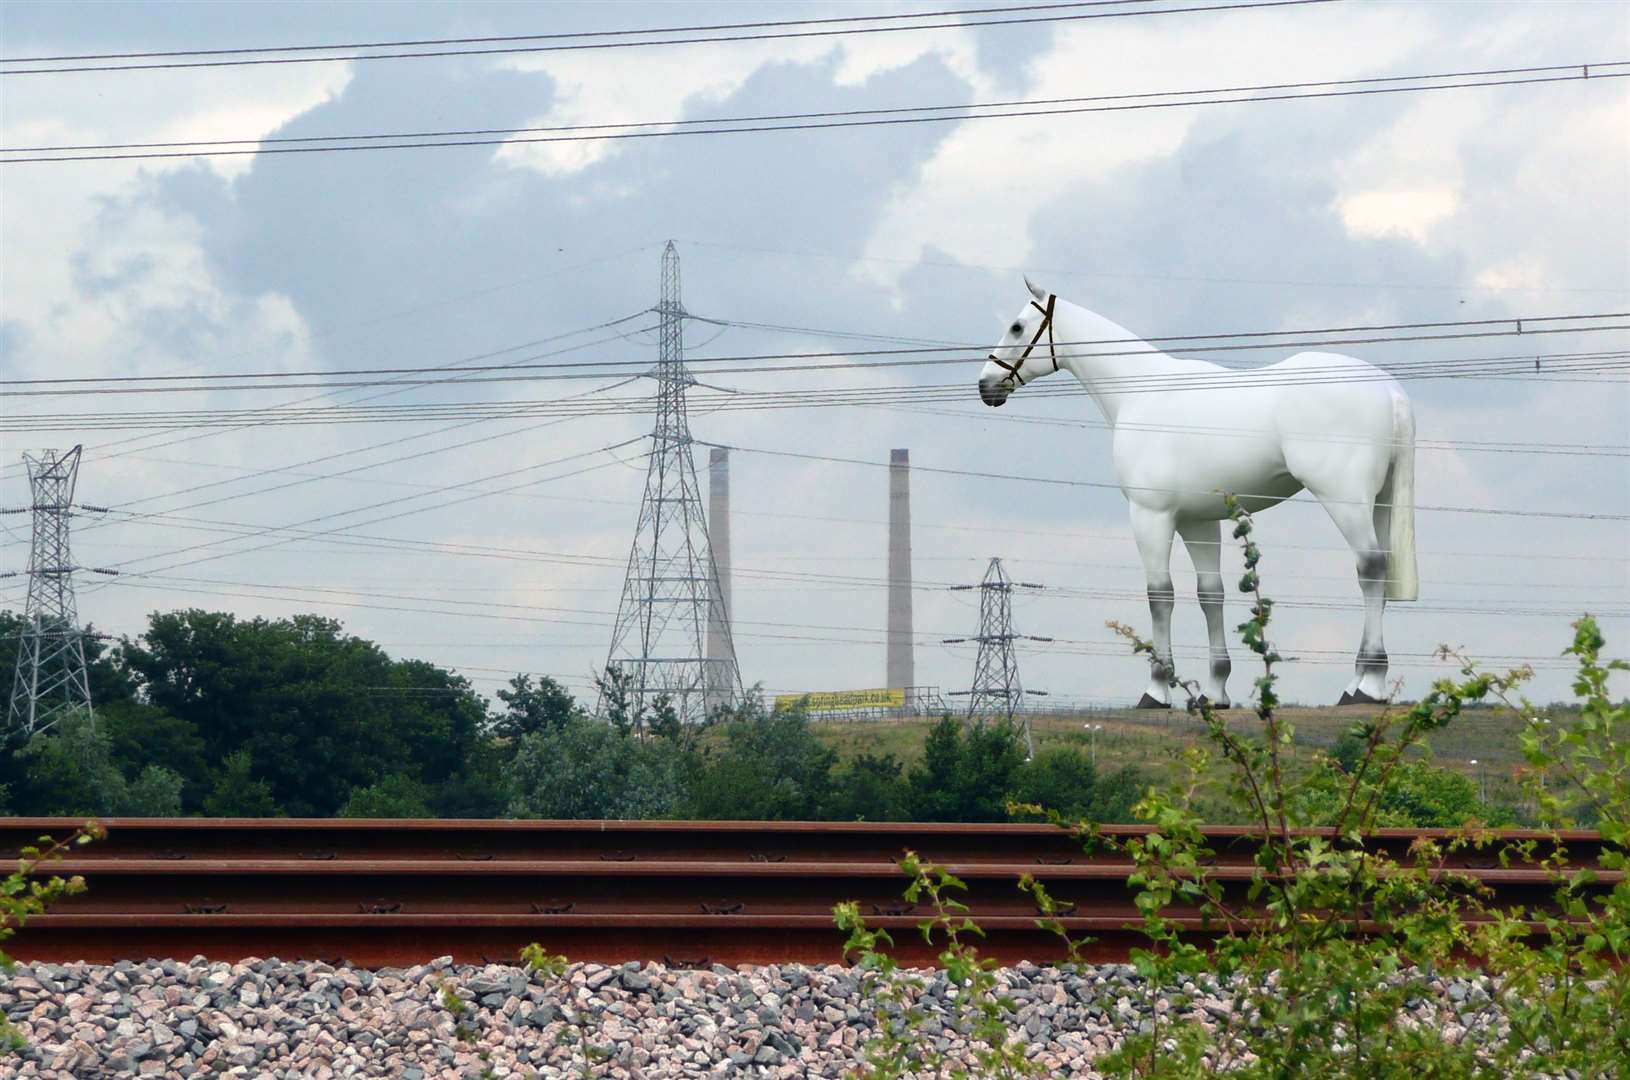 The white horse would have been visible for 20 miles – and a landmark for motorists and high-speed rail passengers